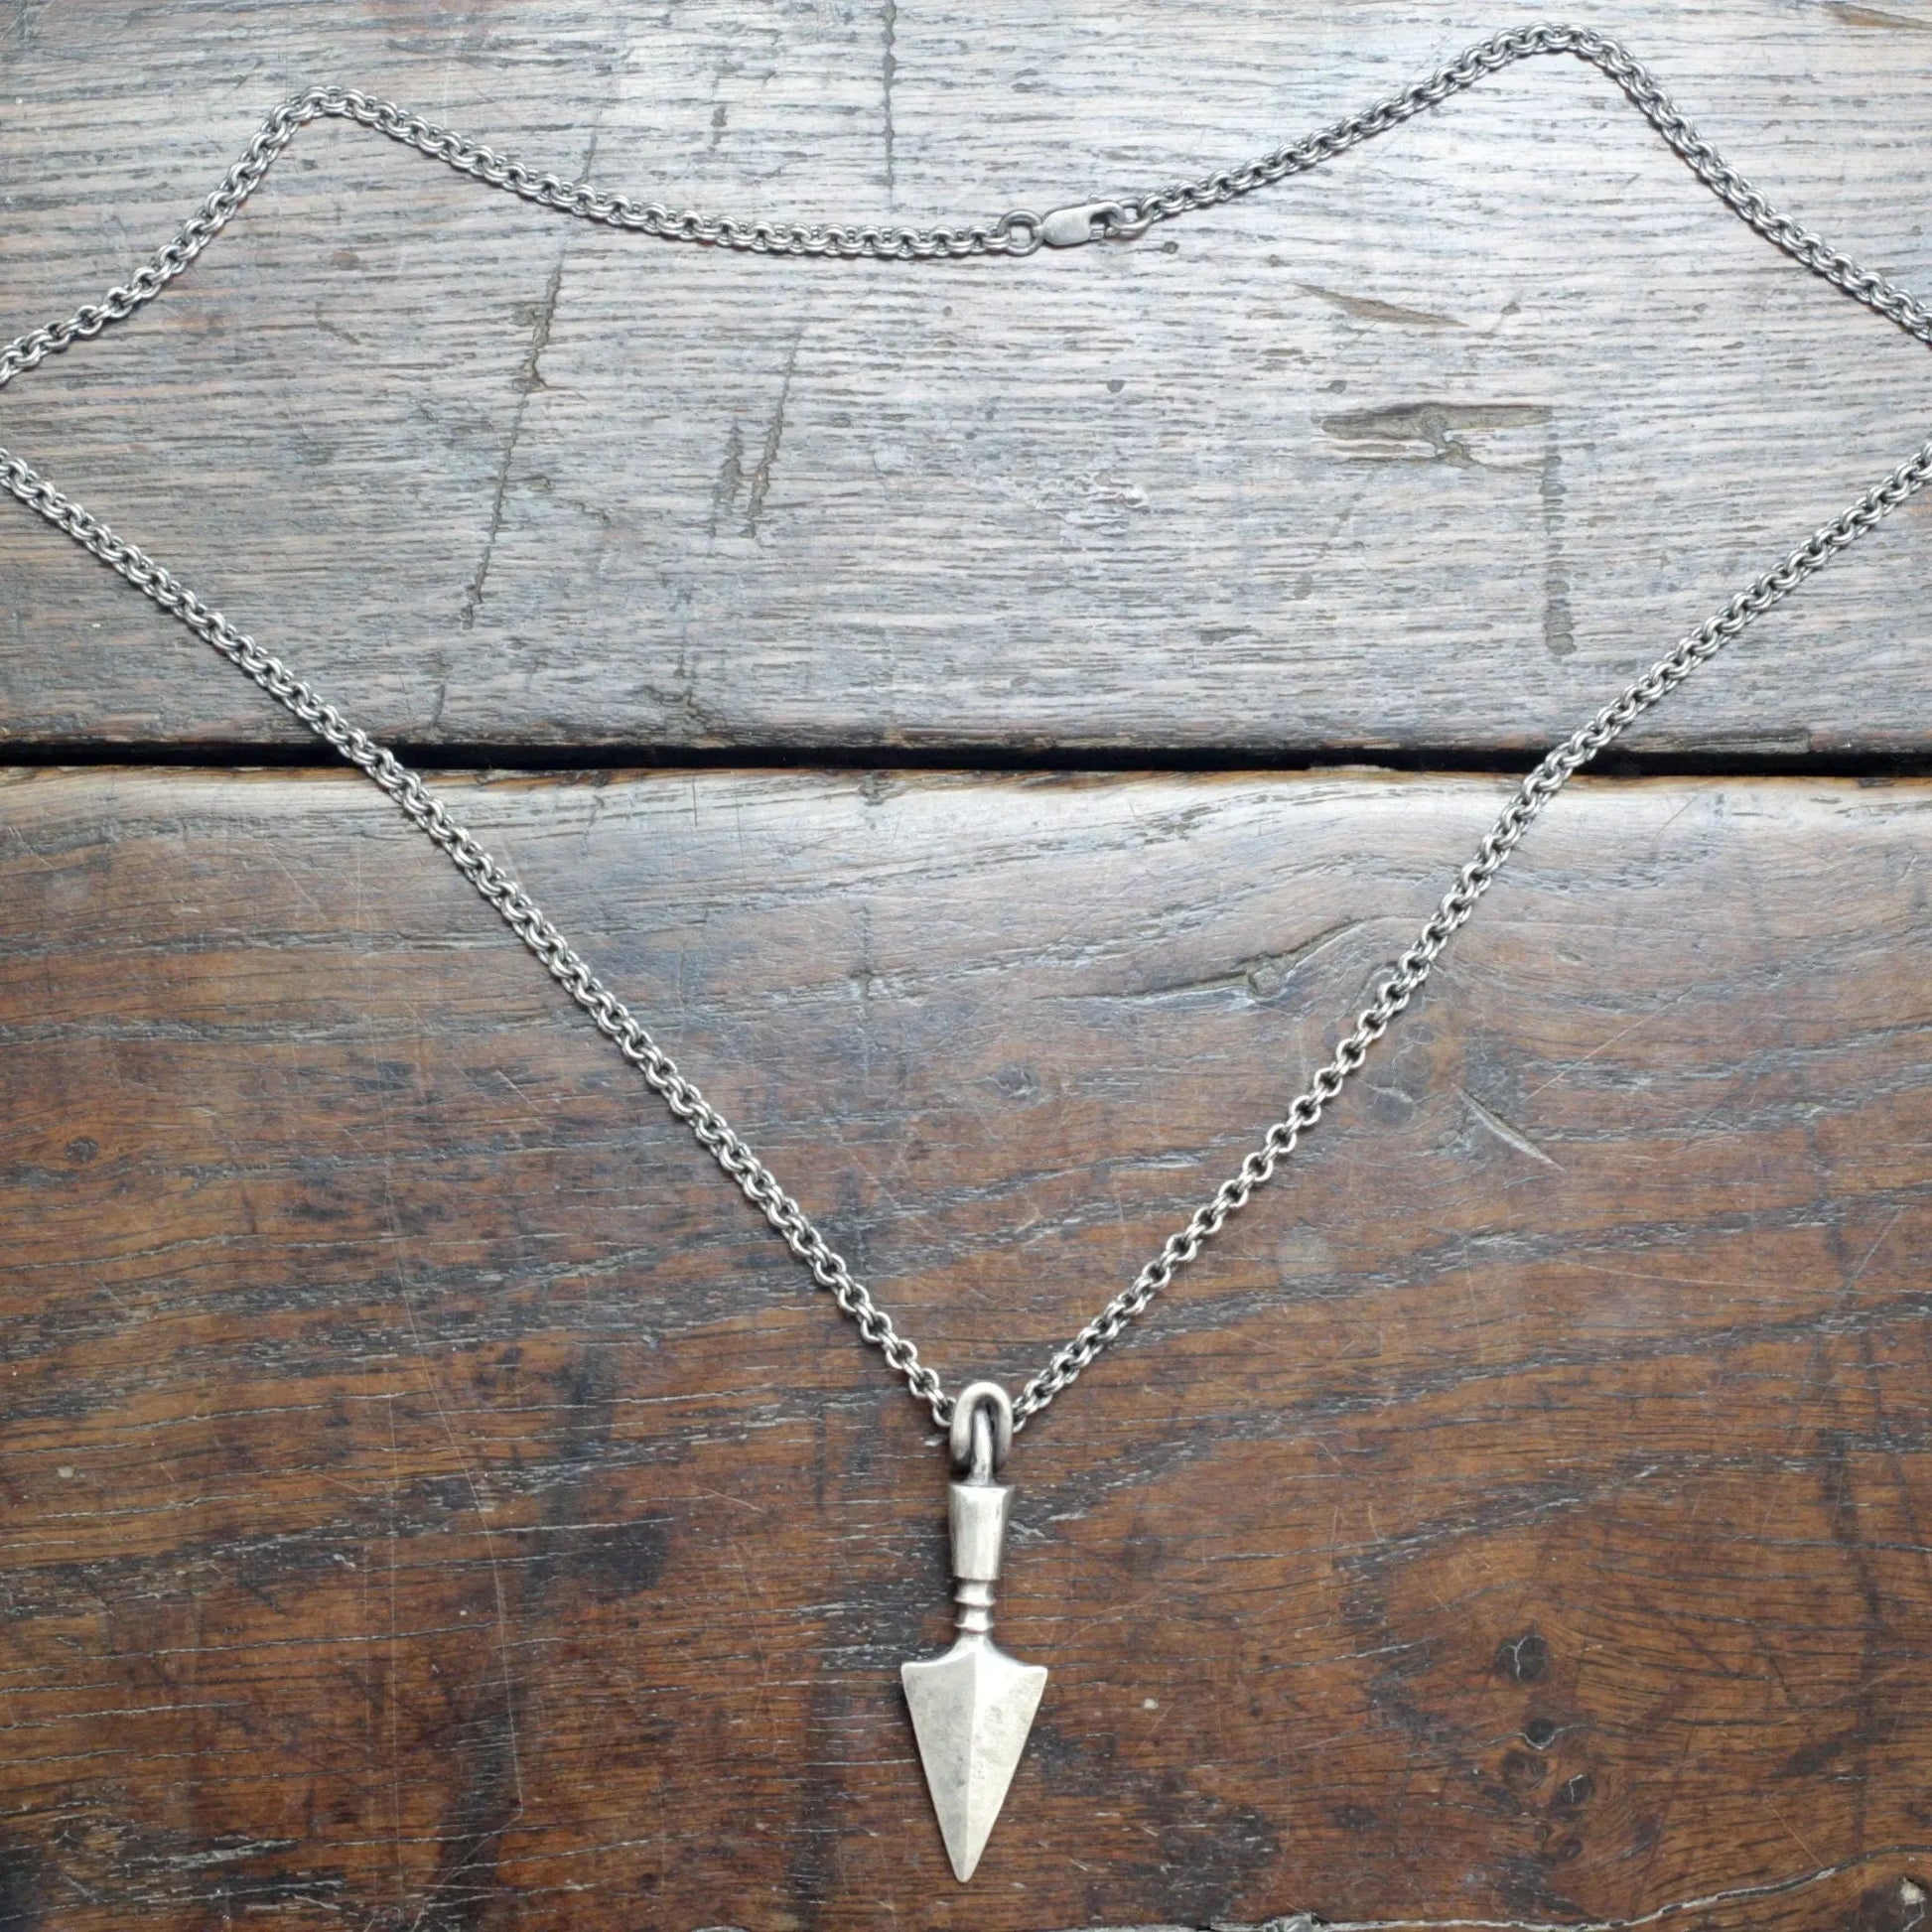 Forged Silver Arrow Necklace, a Viking age arrow pendant necklace